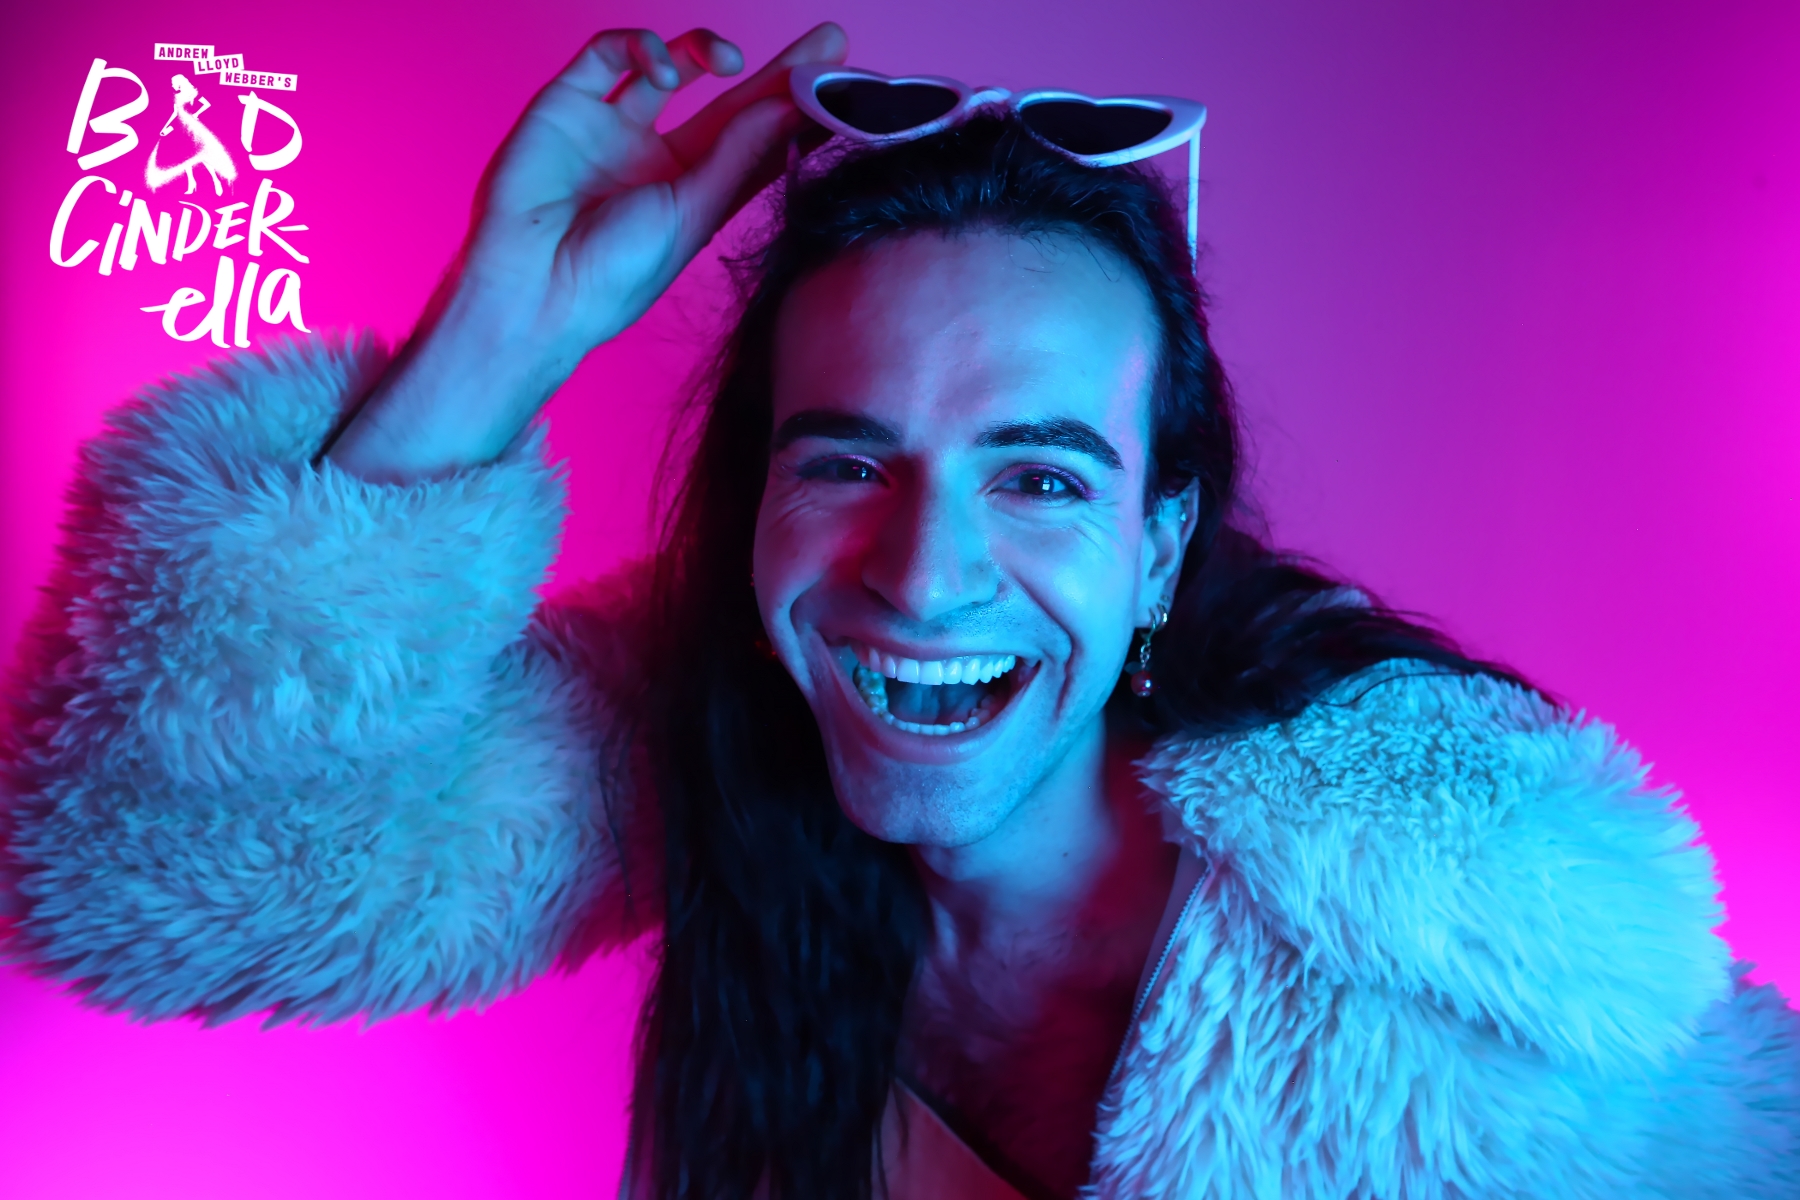 neon glow in dark led photo booth